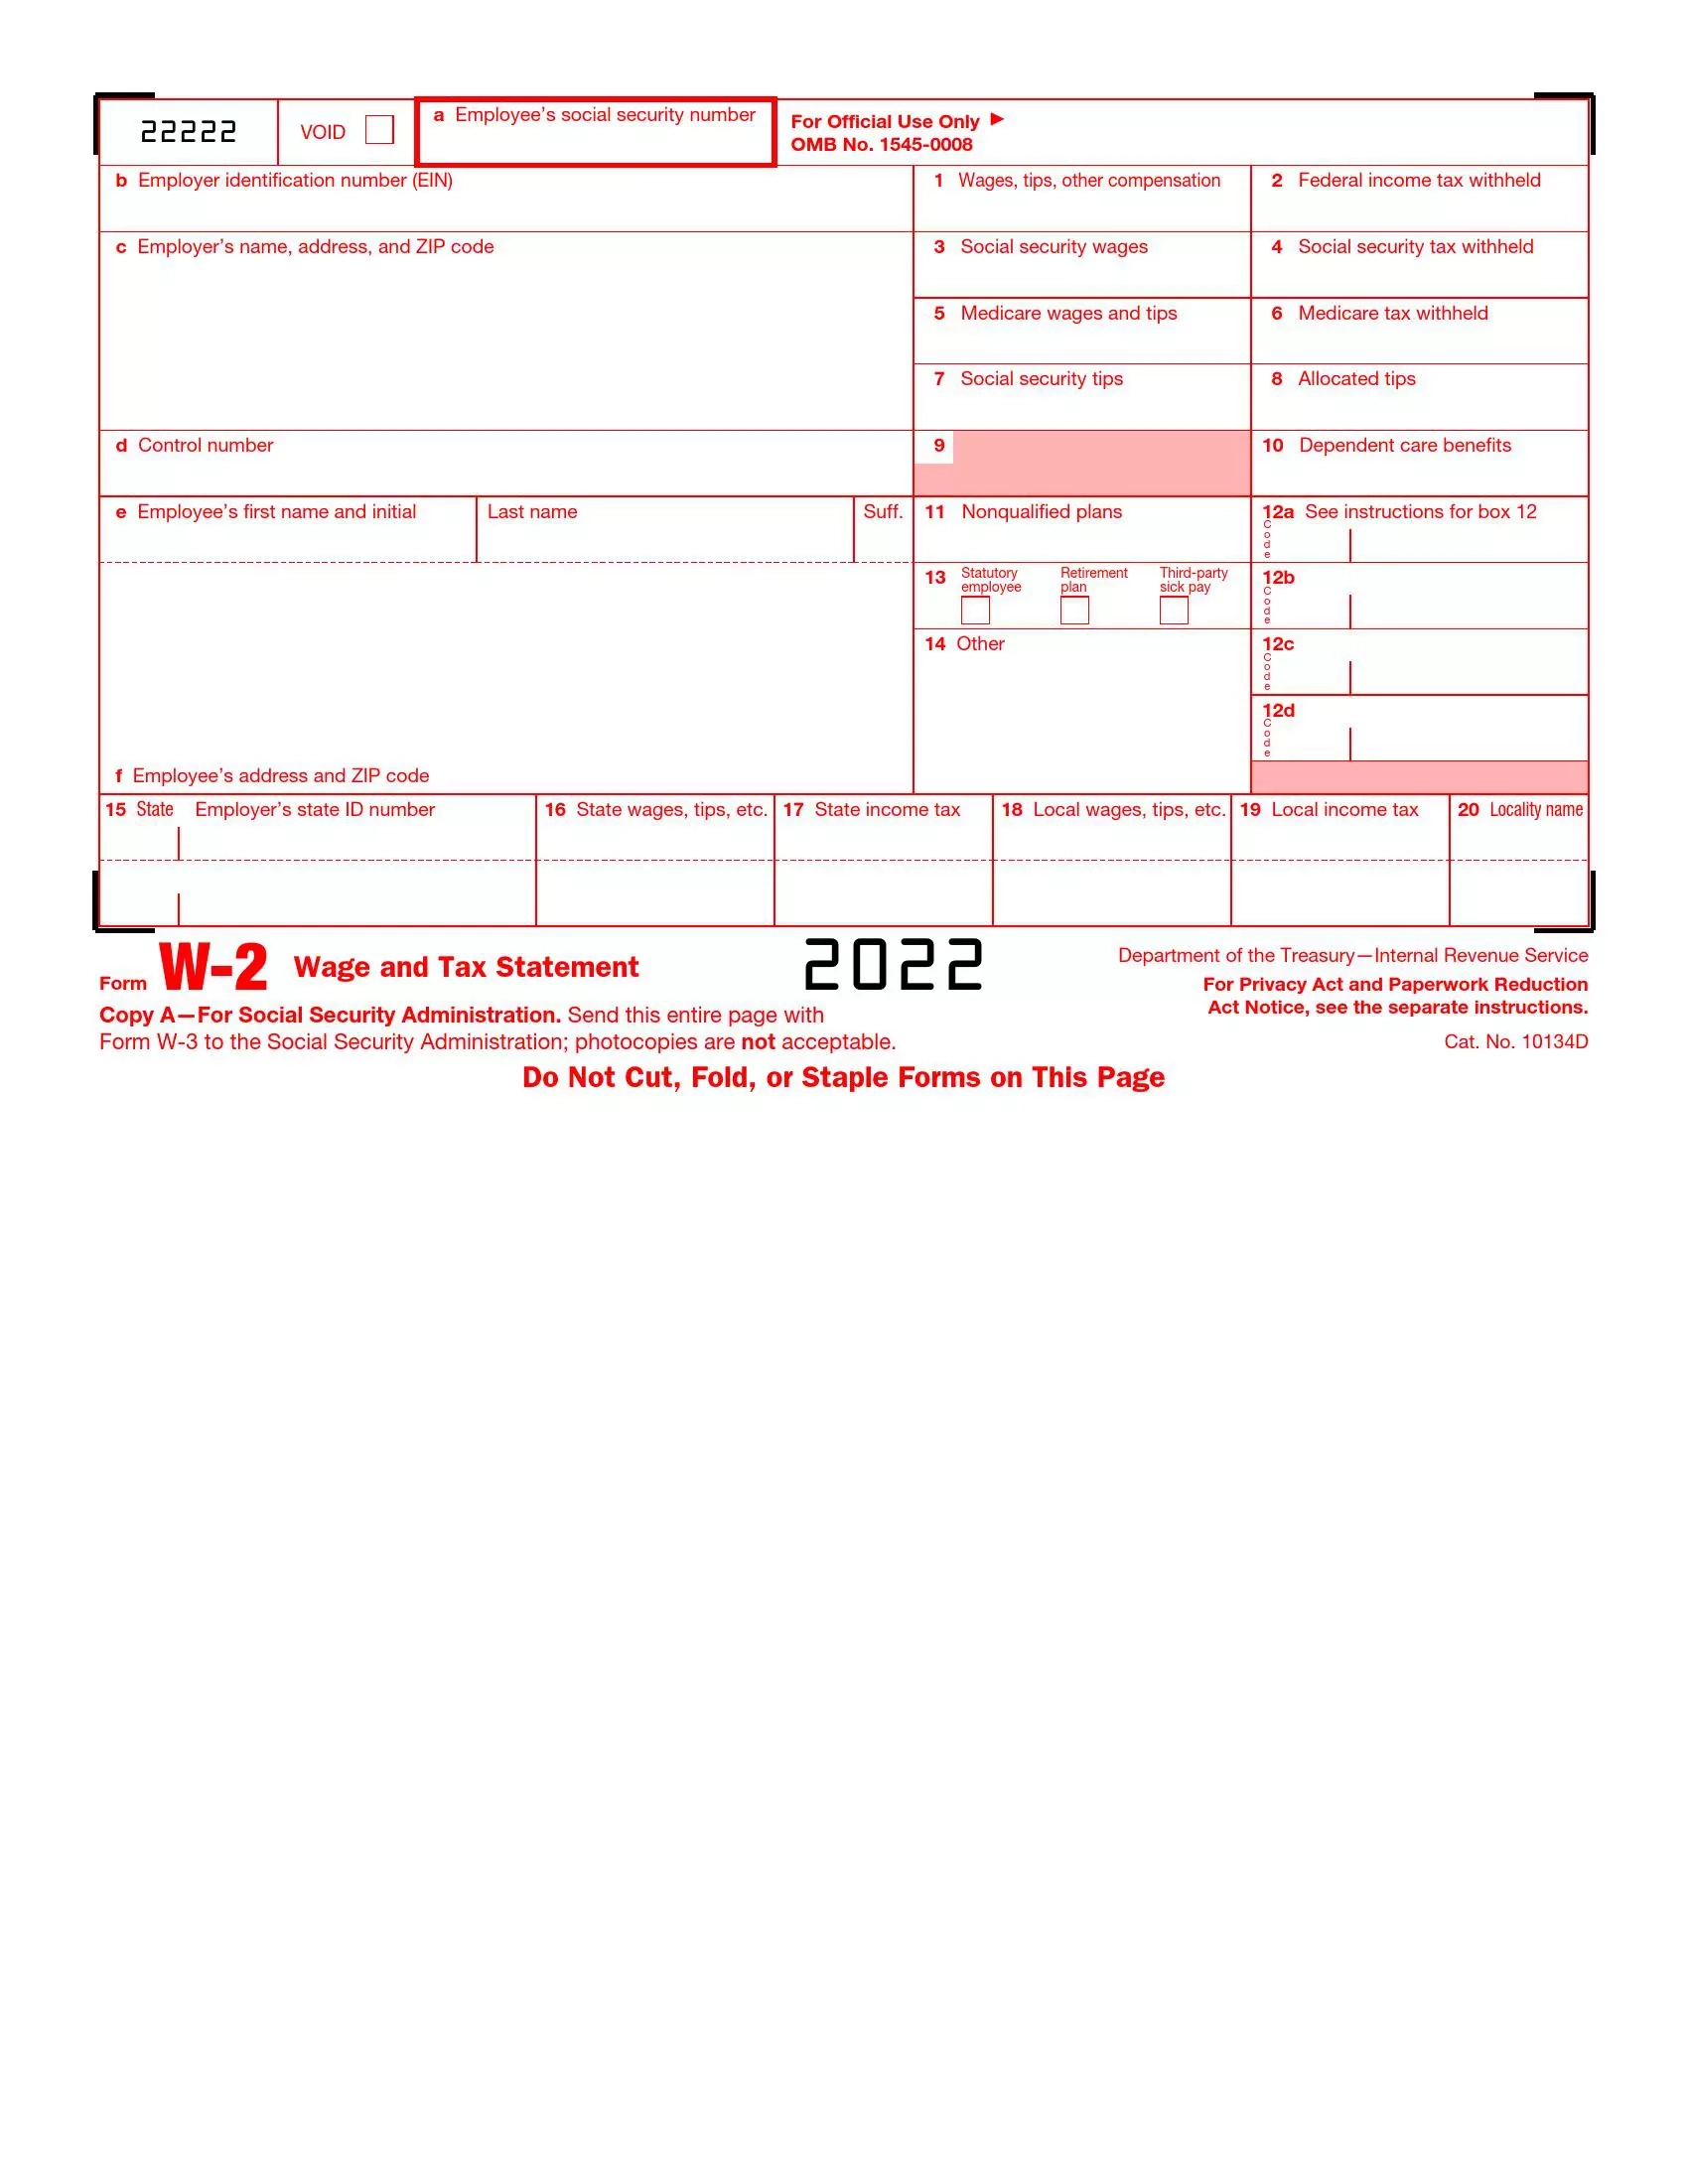 Irs Form W-2 ≡ Fill Out Printable Pdf Forms Online pertaining to Irs W2 Fillable Form